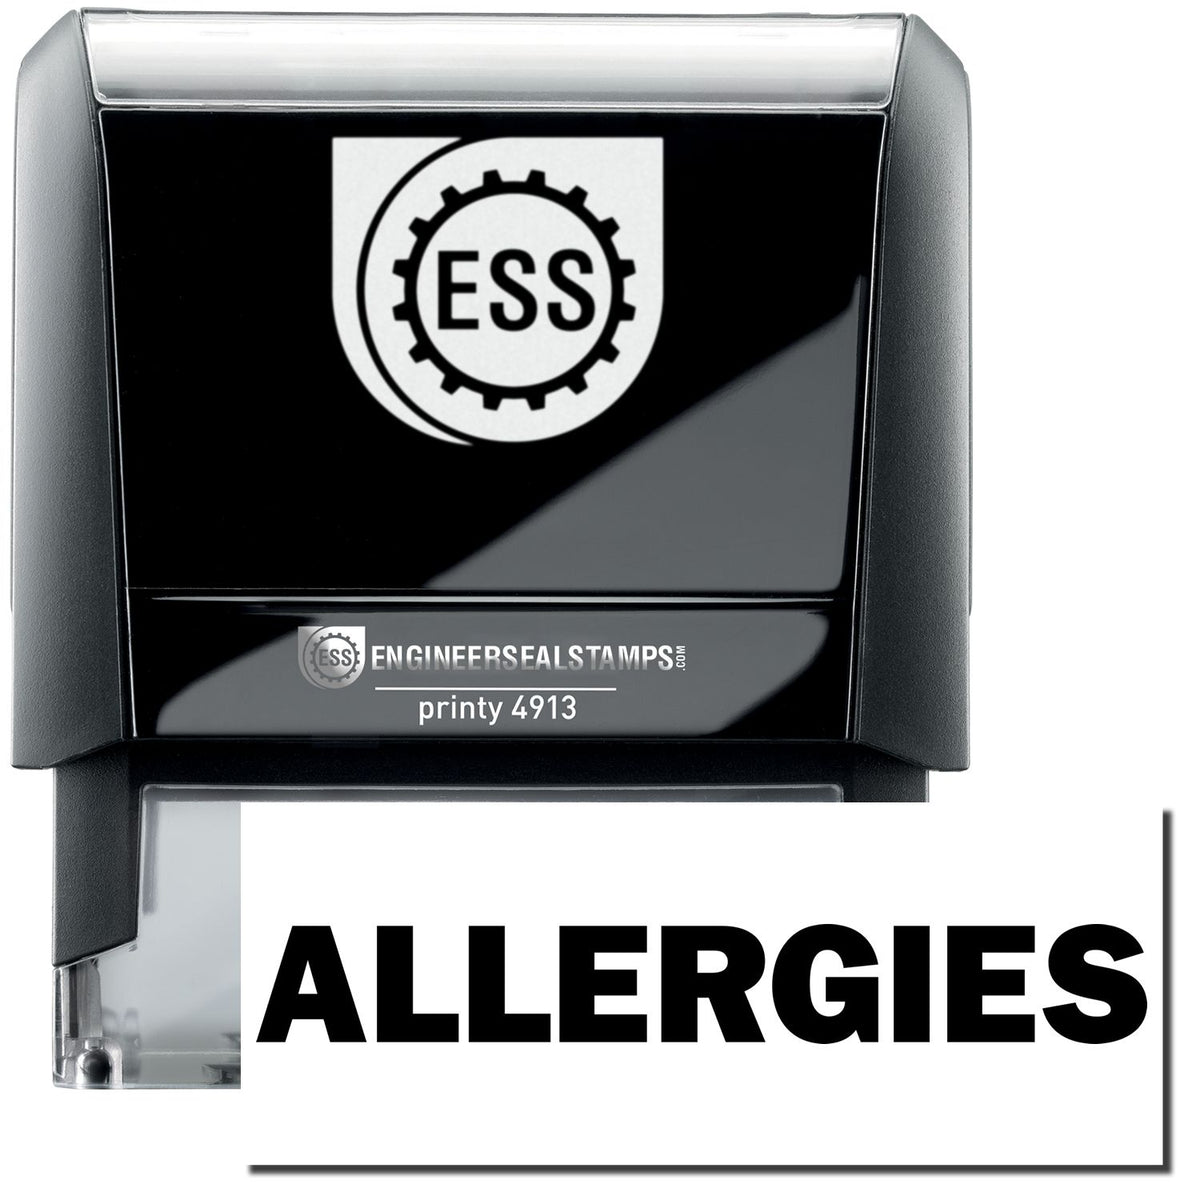 A self-inking stamp with a stamped image showing how the text &quot;ALLERGIES&quot; in a large font is displayed by it after stamping.